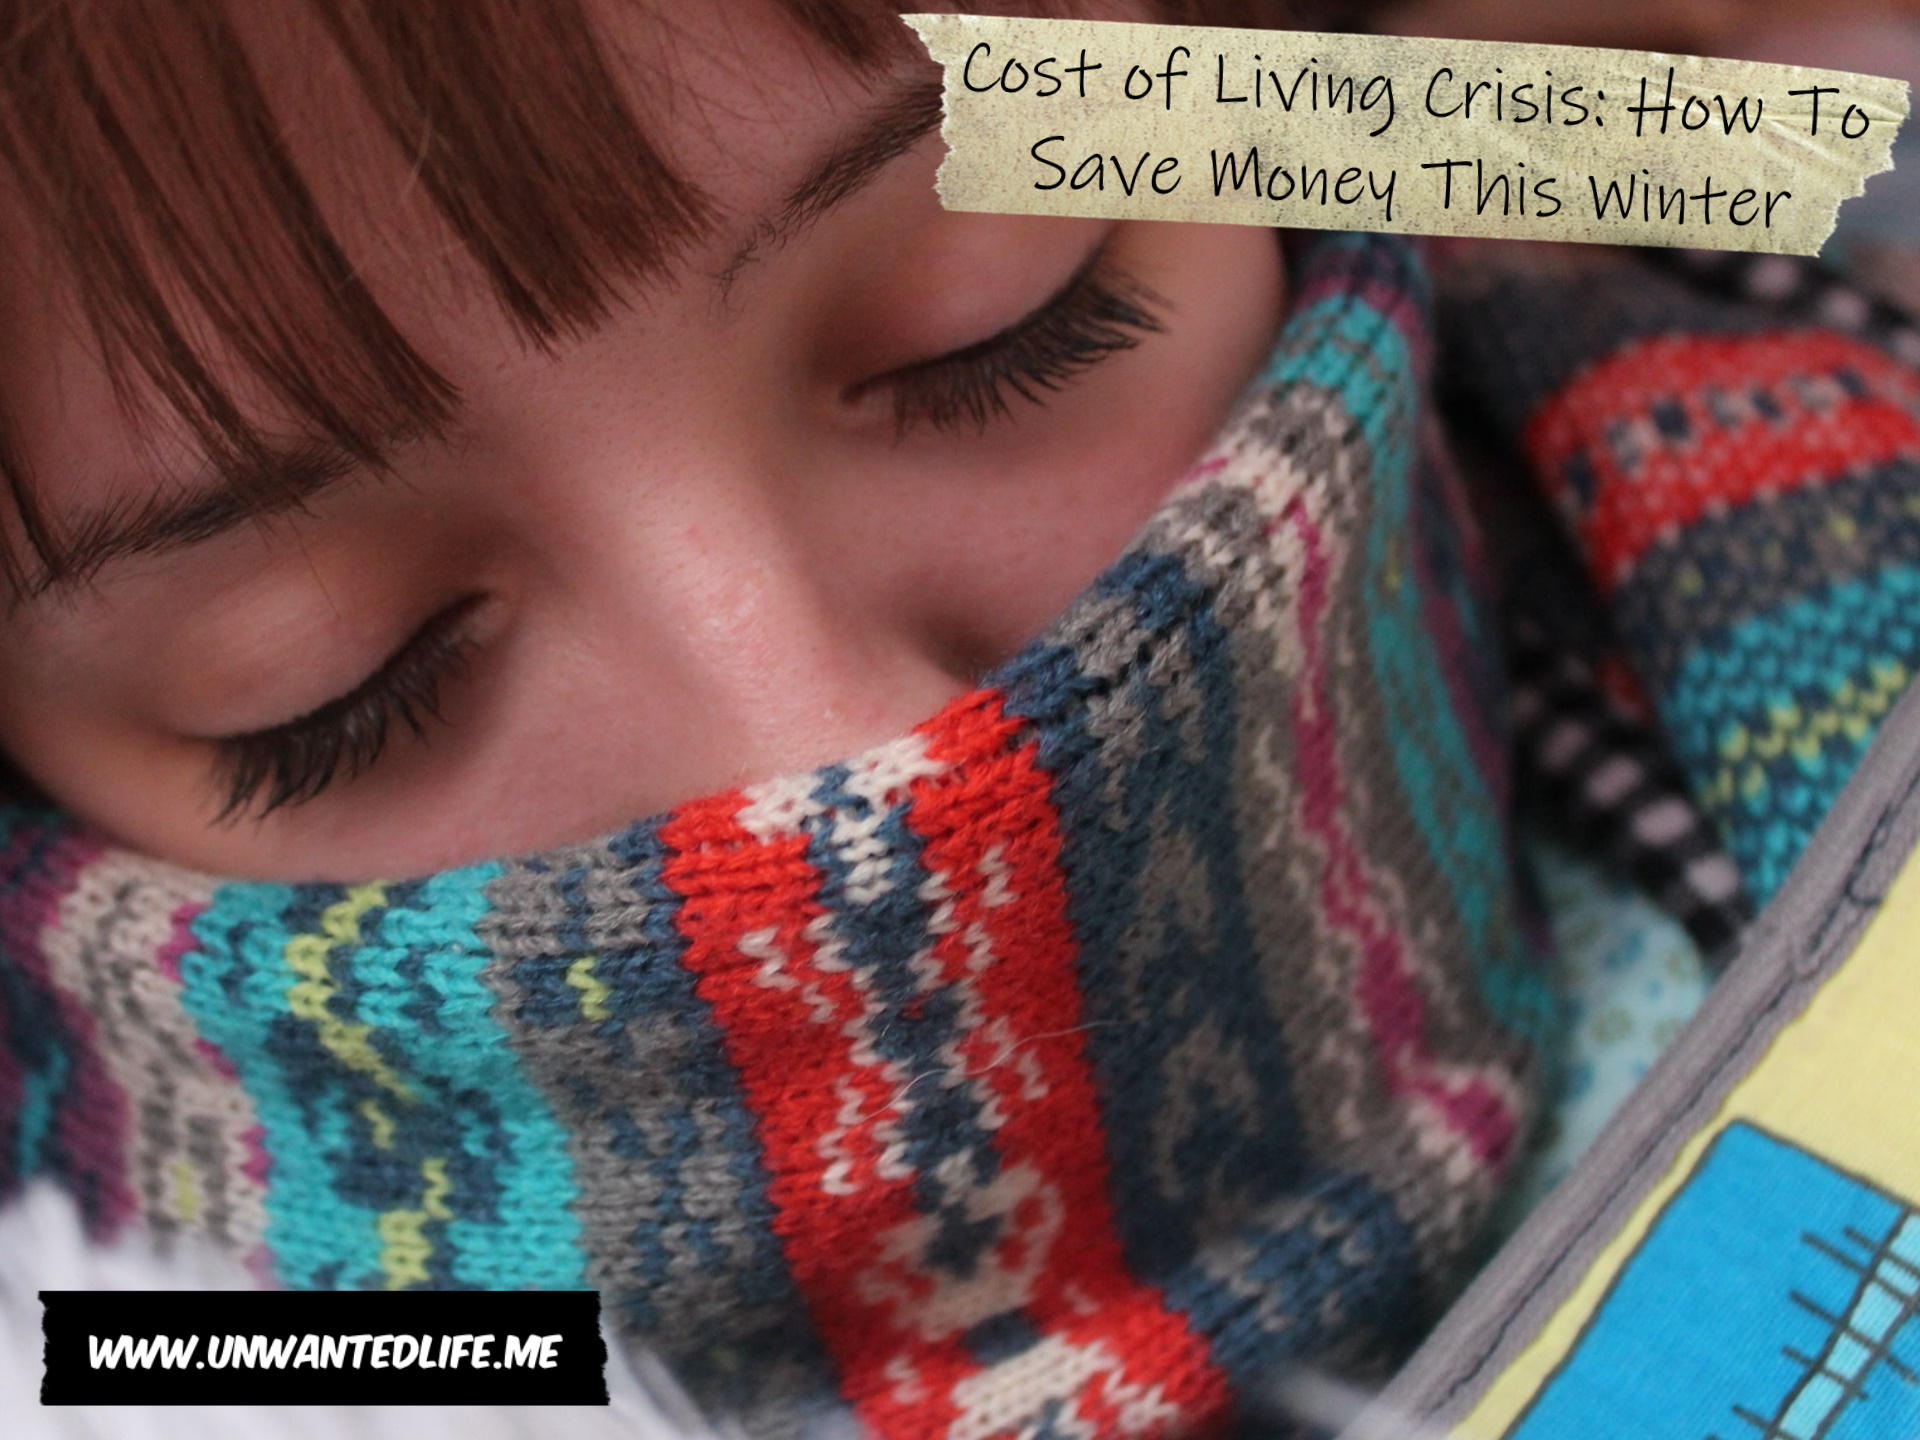 A close-up photo of a White woman wrapped up in a colourful scarf to represent the topic of the article - Cost of Living Crisis: How To Save Money This Winter